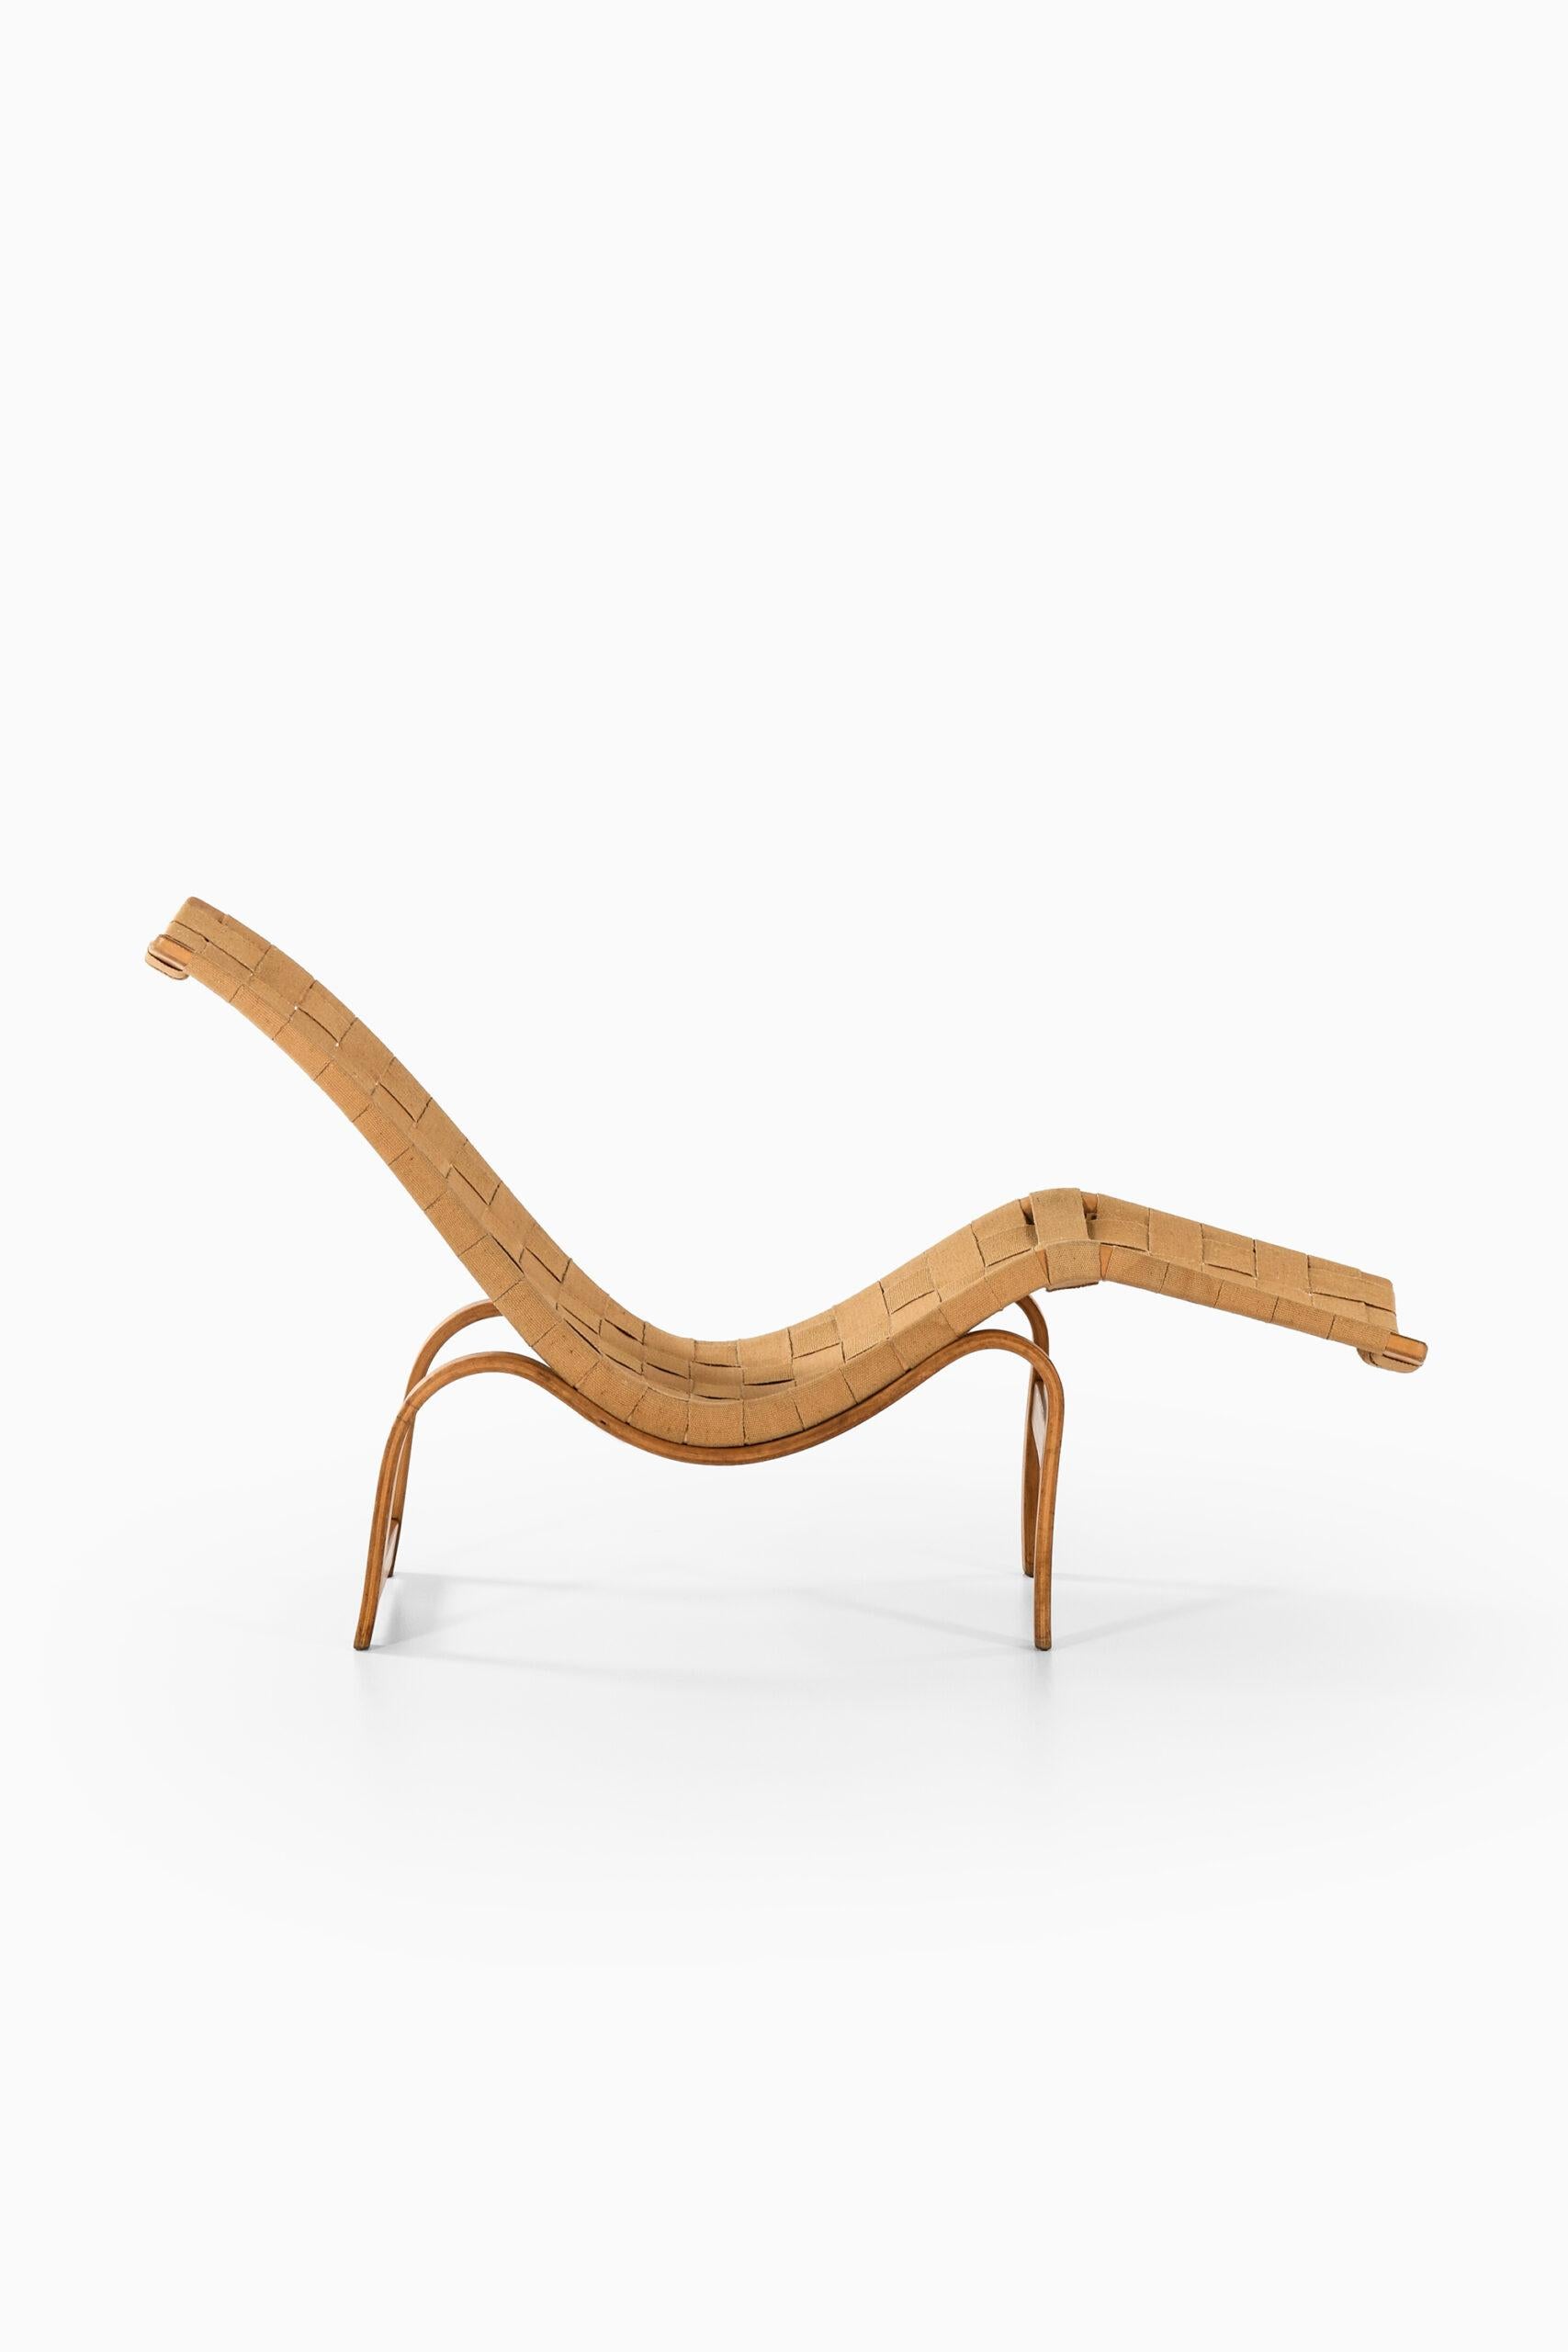 Rare early lounge chair designed by Bruno Mathsson. Produced by Karl Mathsson in Värnamo, Sweden.